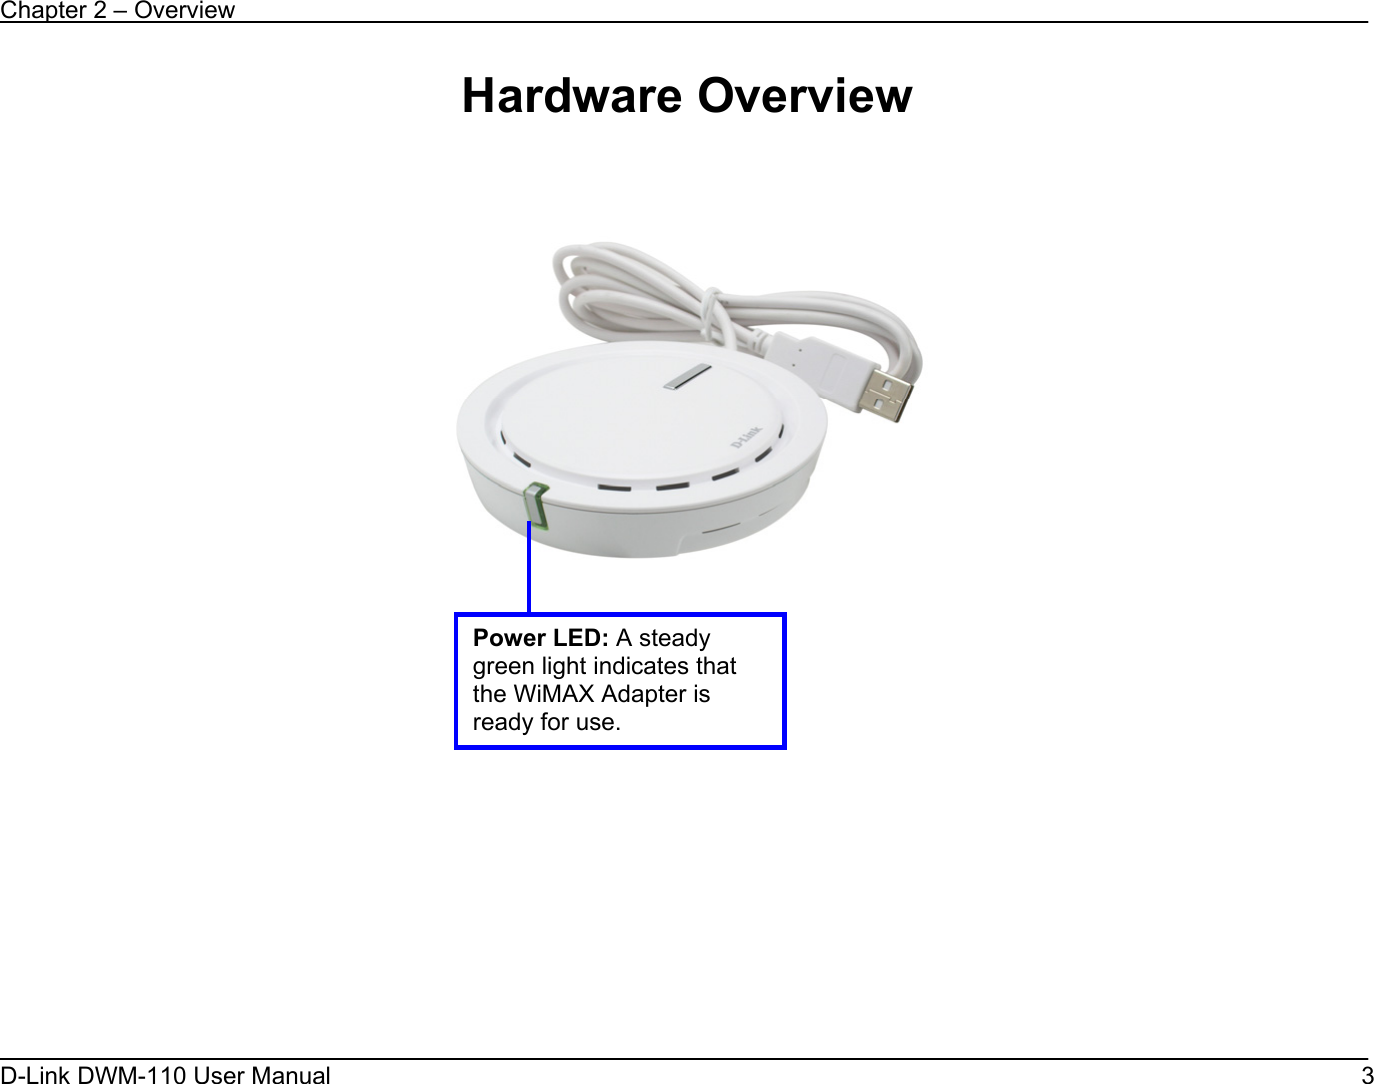 Chapter 2 – Overview D-Link DWM-110 User Manual   3 Hardware Overview                      Power LED: A steady green light indicates that the WiMAX Adapter is ready for use. 